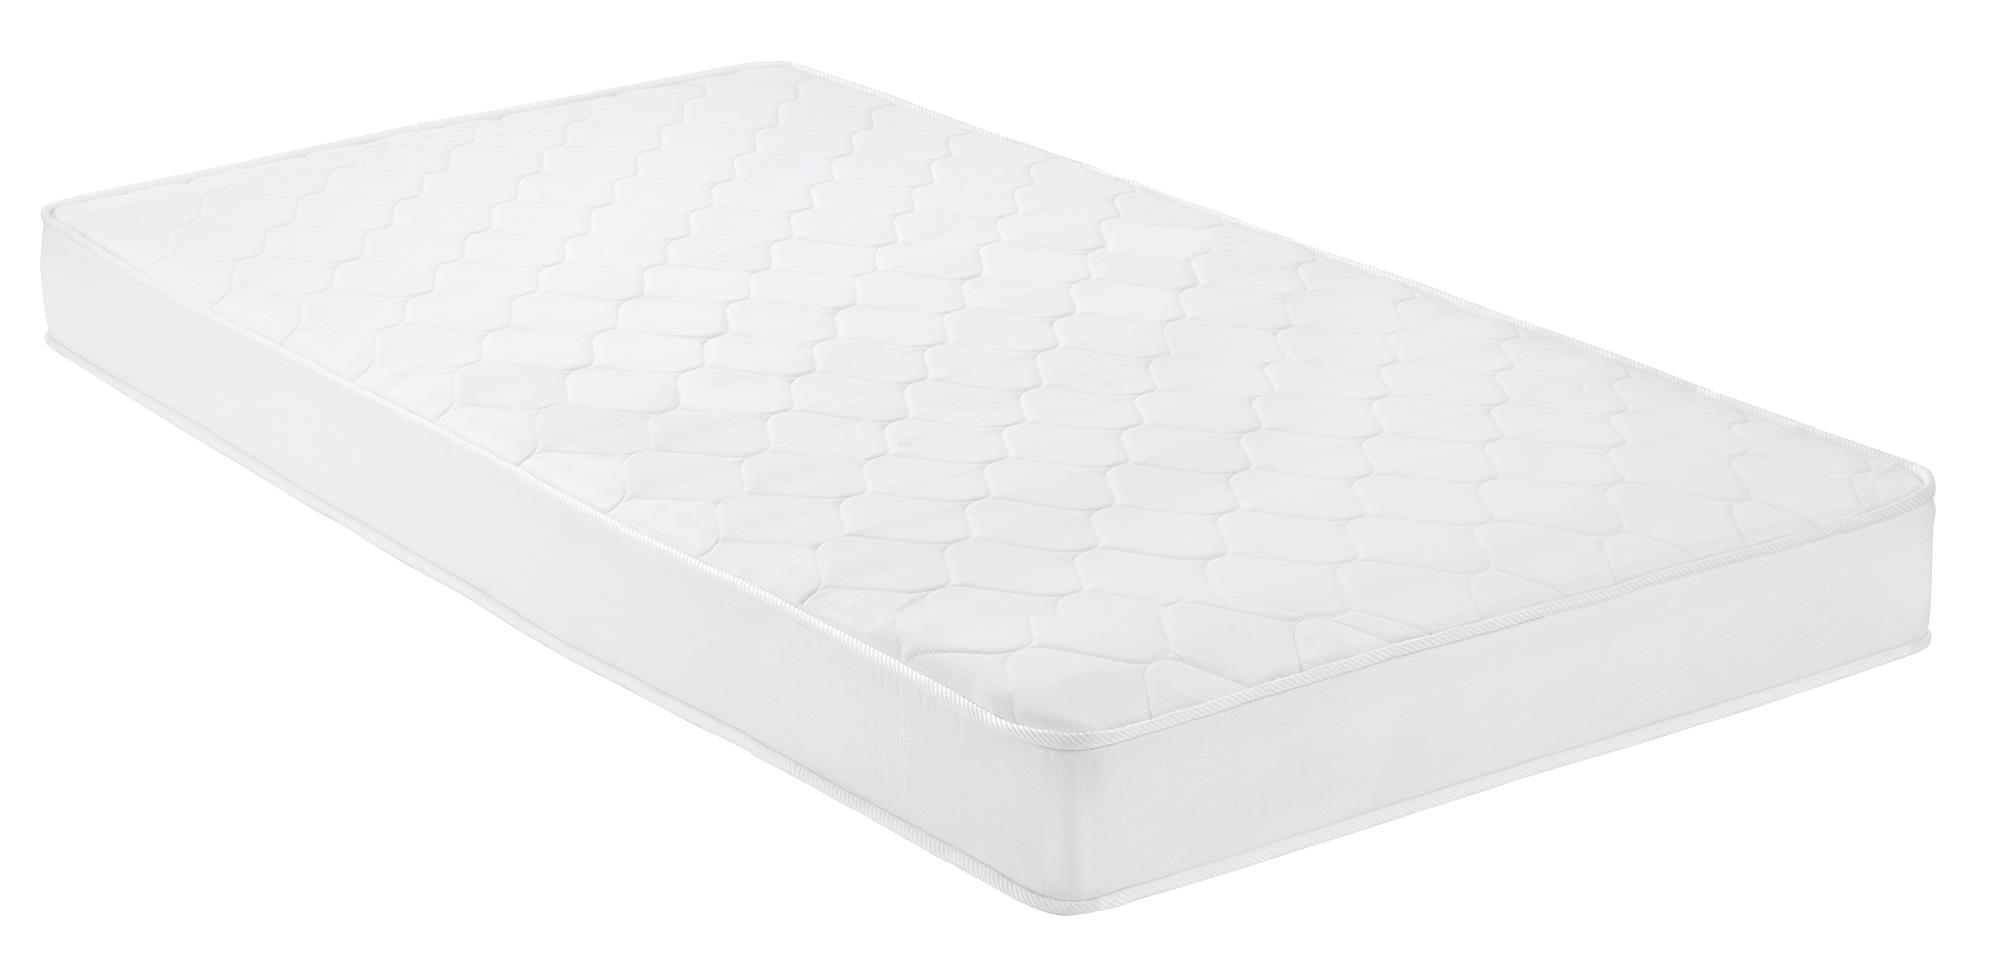 Mainstays 6" Innerspring Coil Mattress, Twin - image 3 of 16